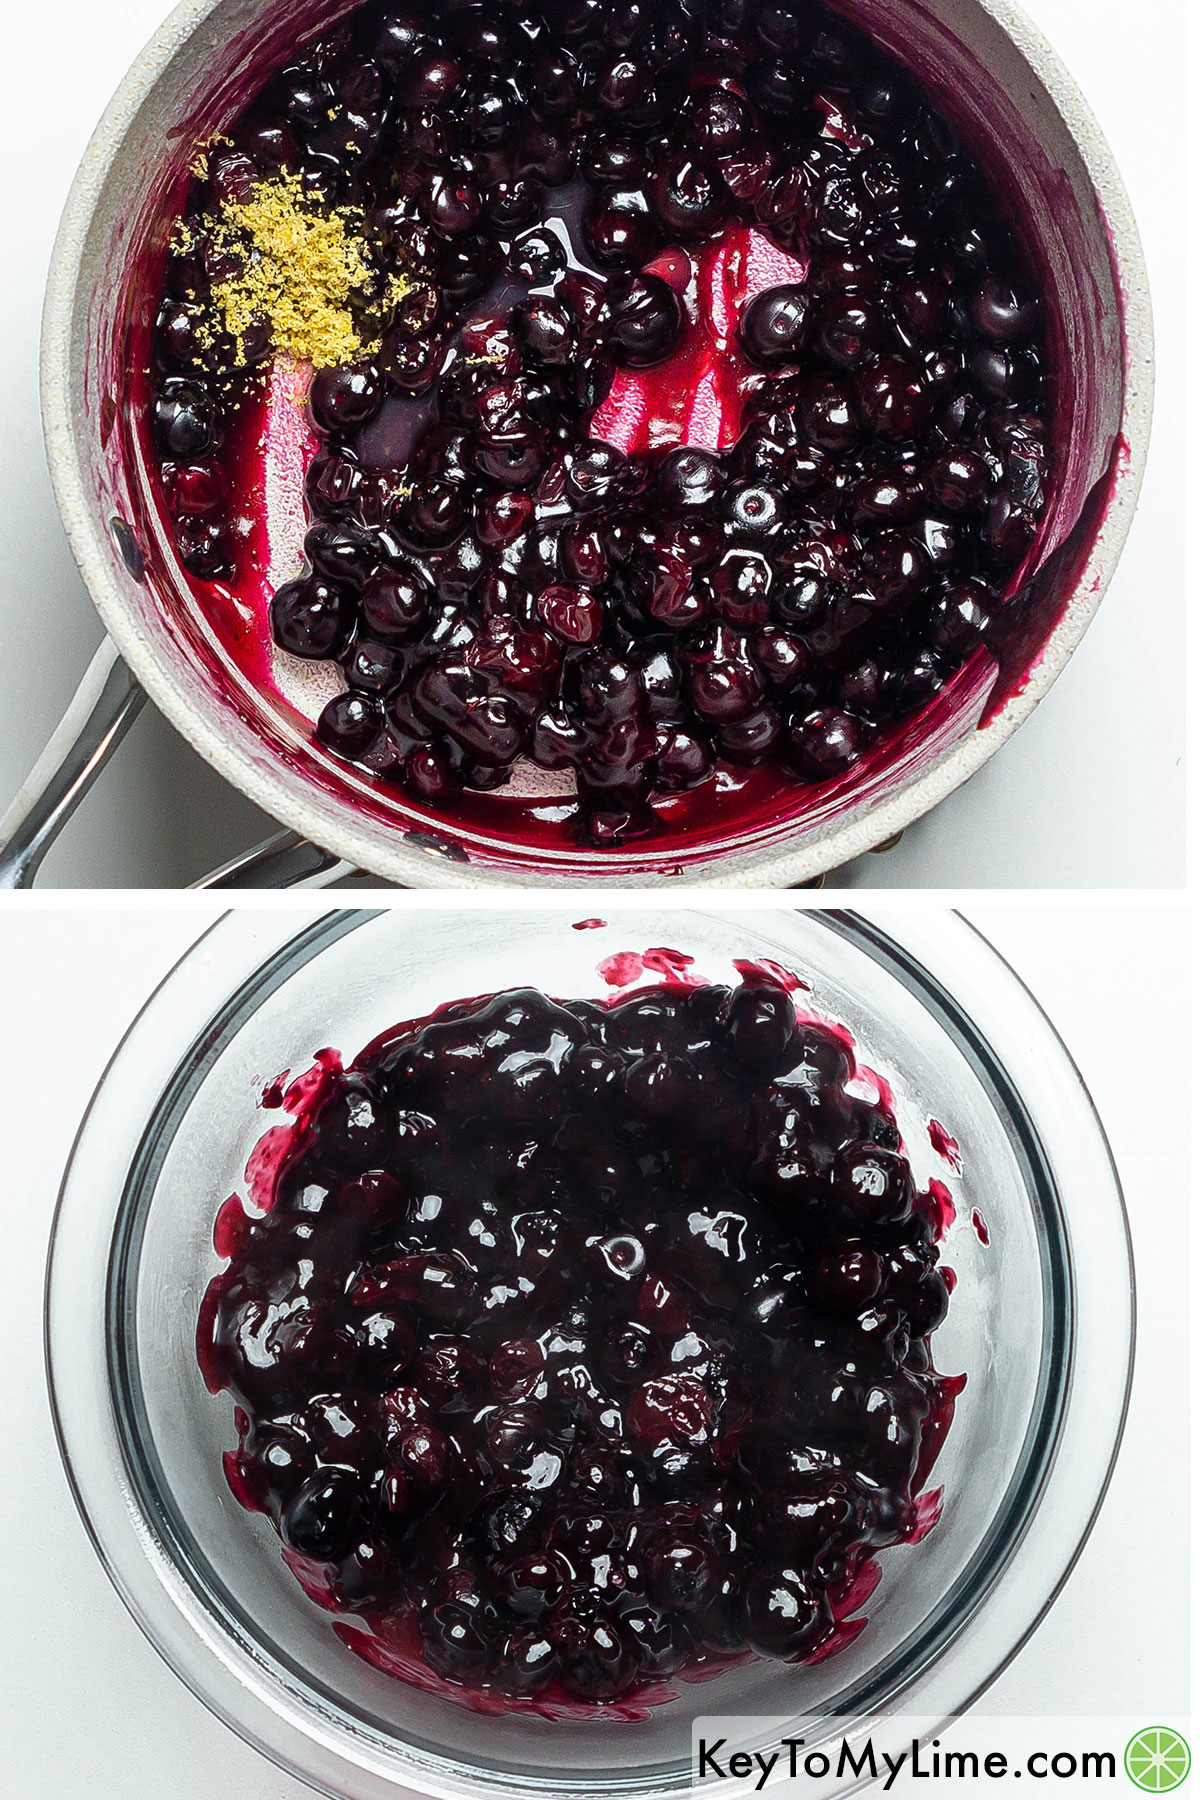 Adding lemon juice and zest, and mixing into the blueberry mixture before moving to a bowl.